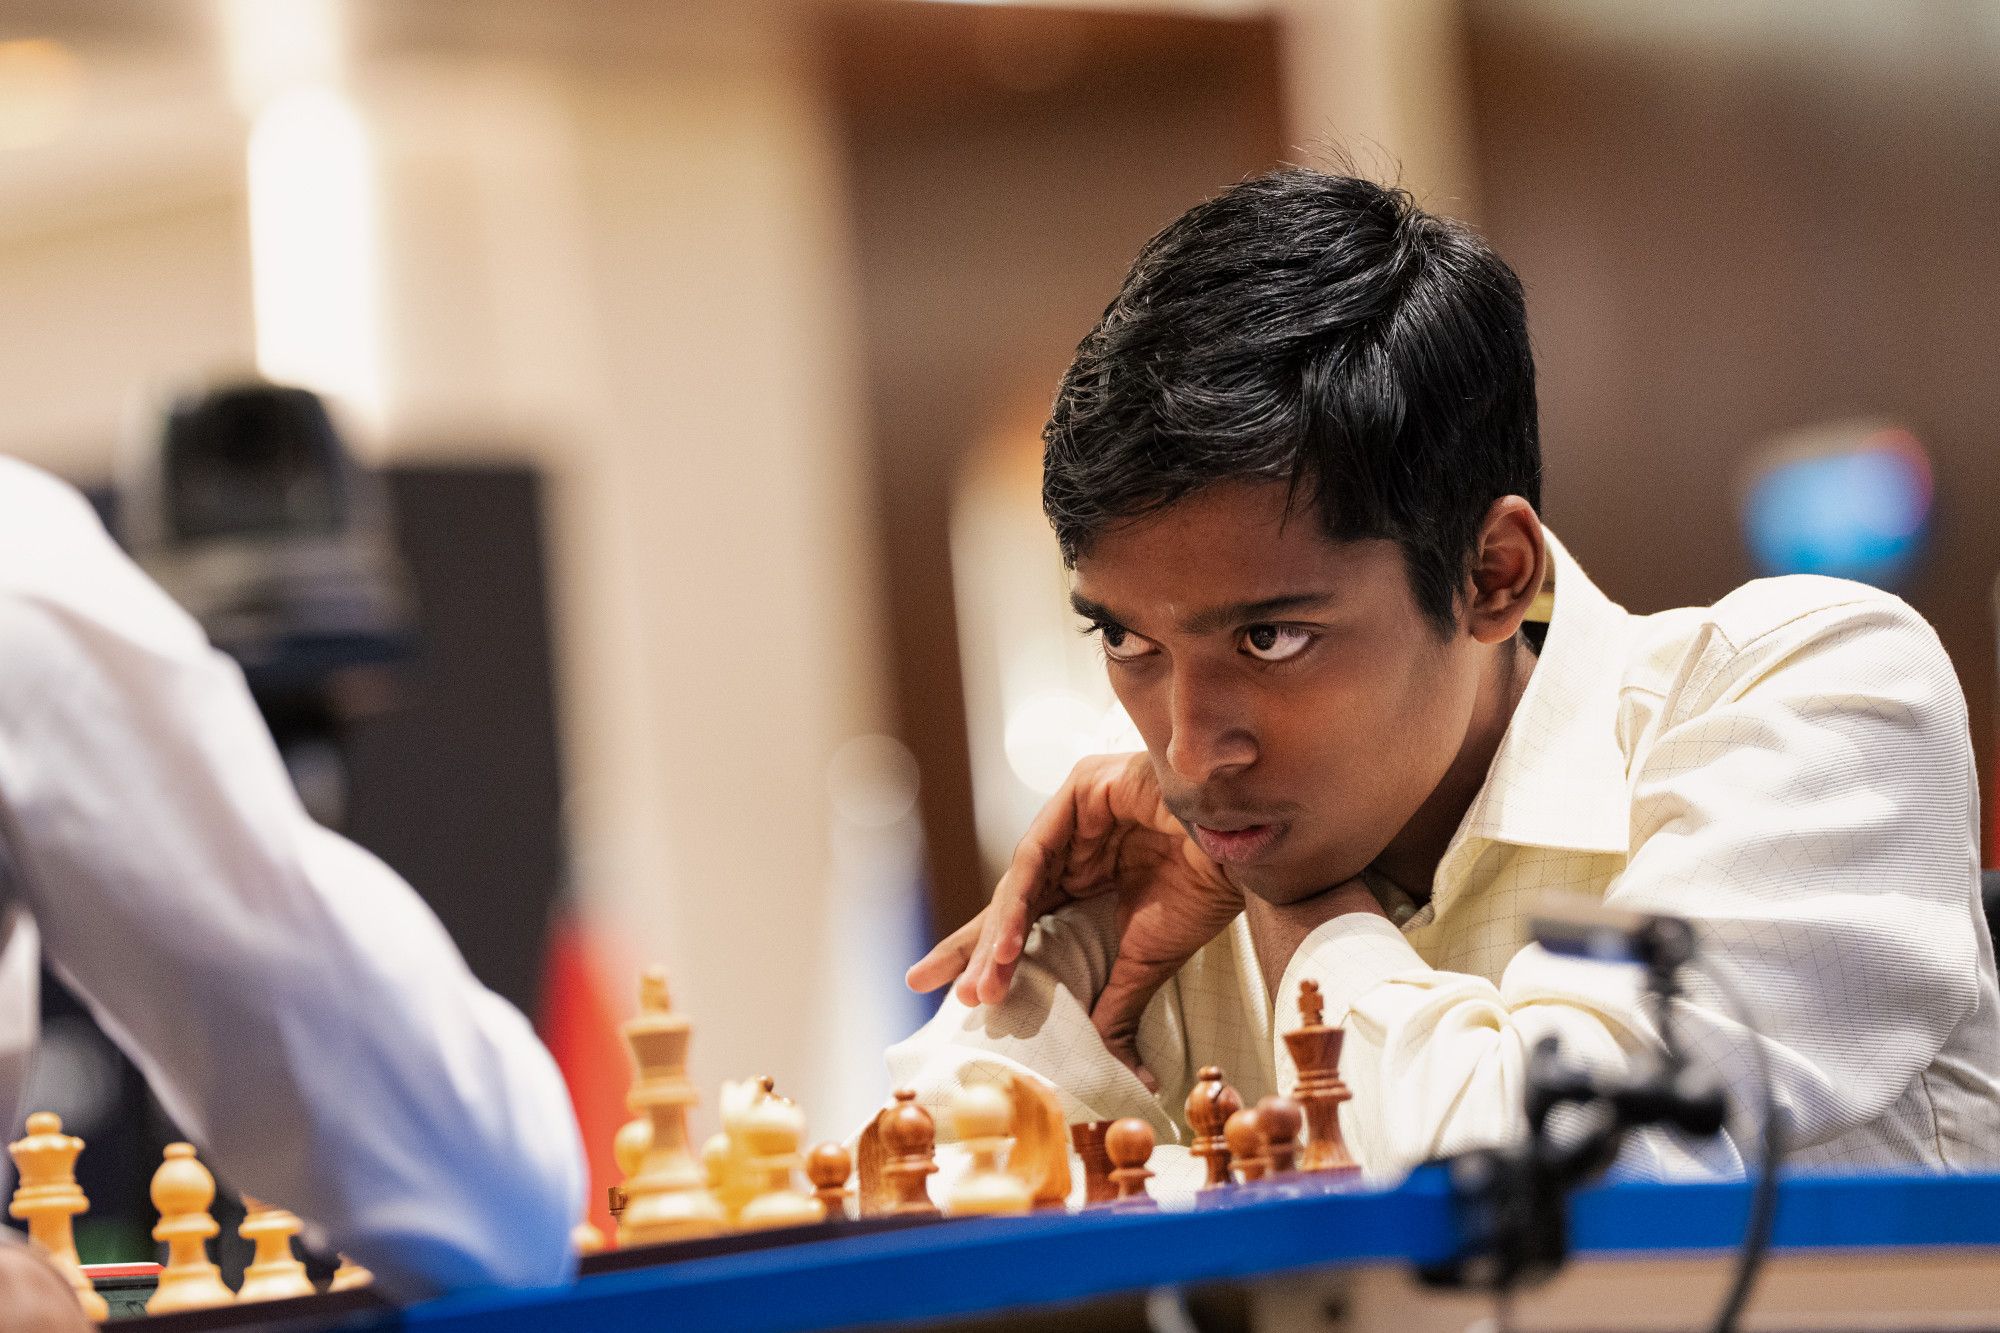 After 6 draws, GM Rameshbabu Praggnanandhaa scores his first win in the  FIDE Grand Swiss 2023! In the 7th round, Praggnanandhaa defeated GM…